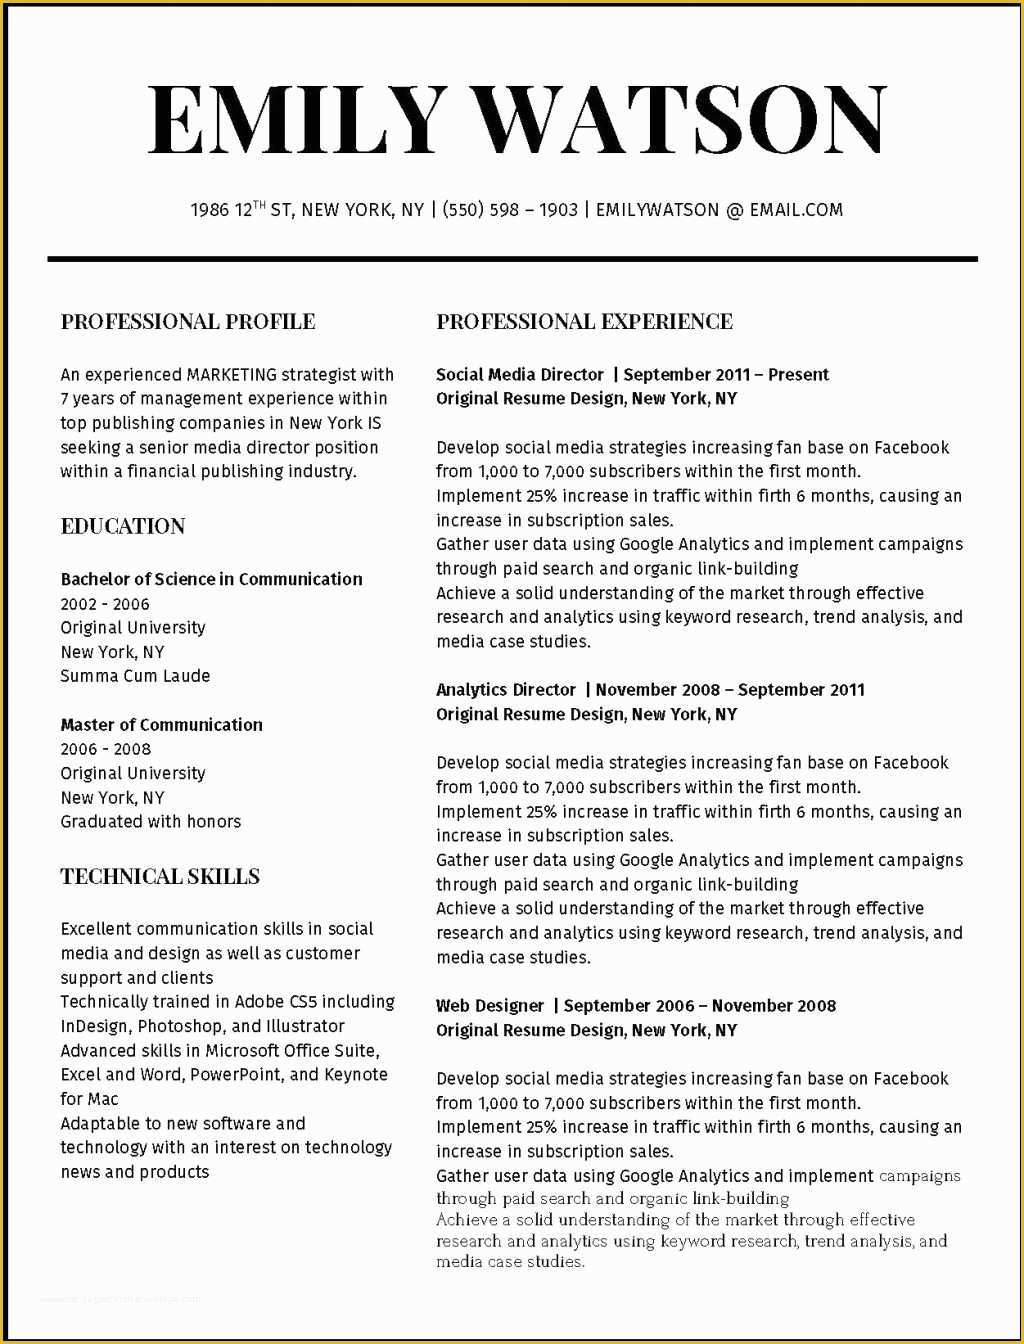 Free Resume Templates for Mac Pages Of Resume and Template Apple Pages Resume Templatesnd